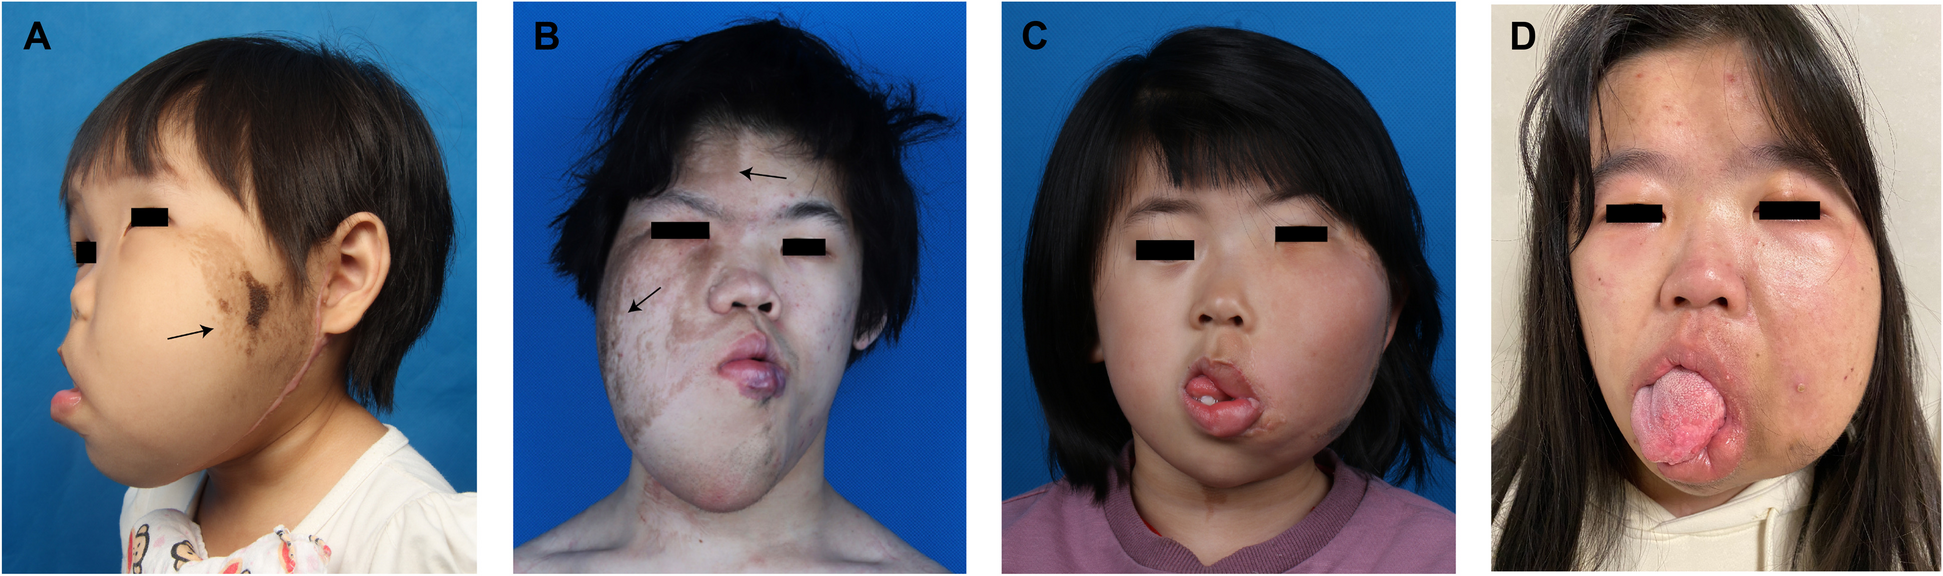 Clinical characteristics and surgical management of facial infiltrating lipomatosis: a single center experience